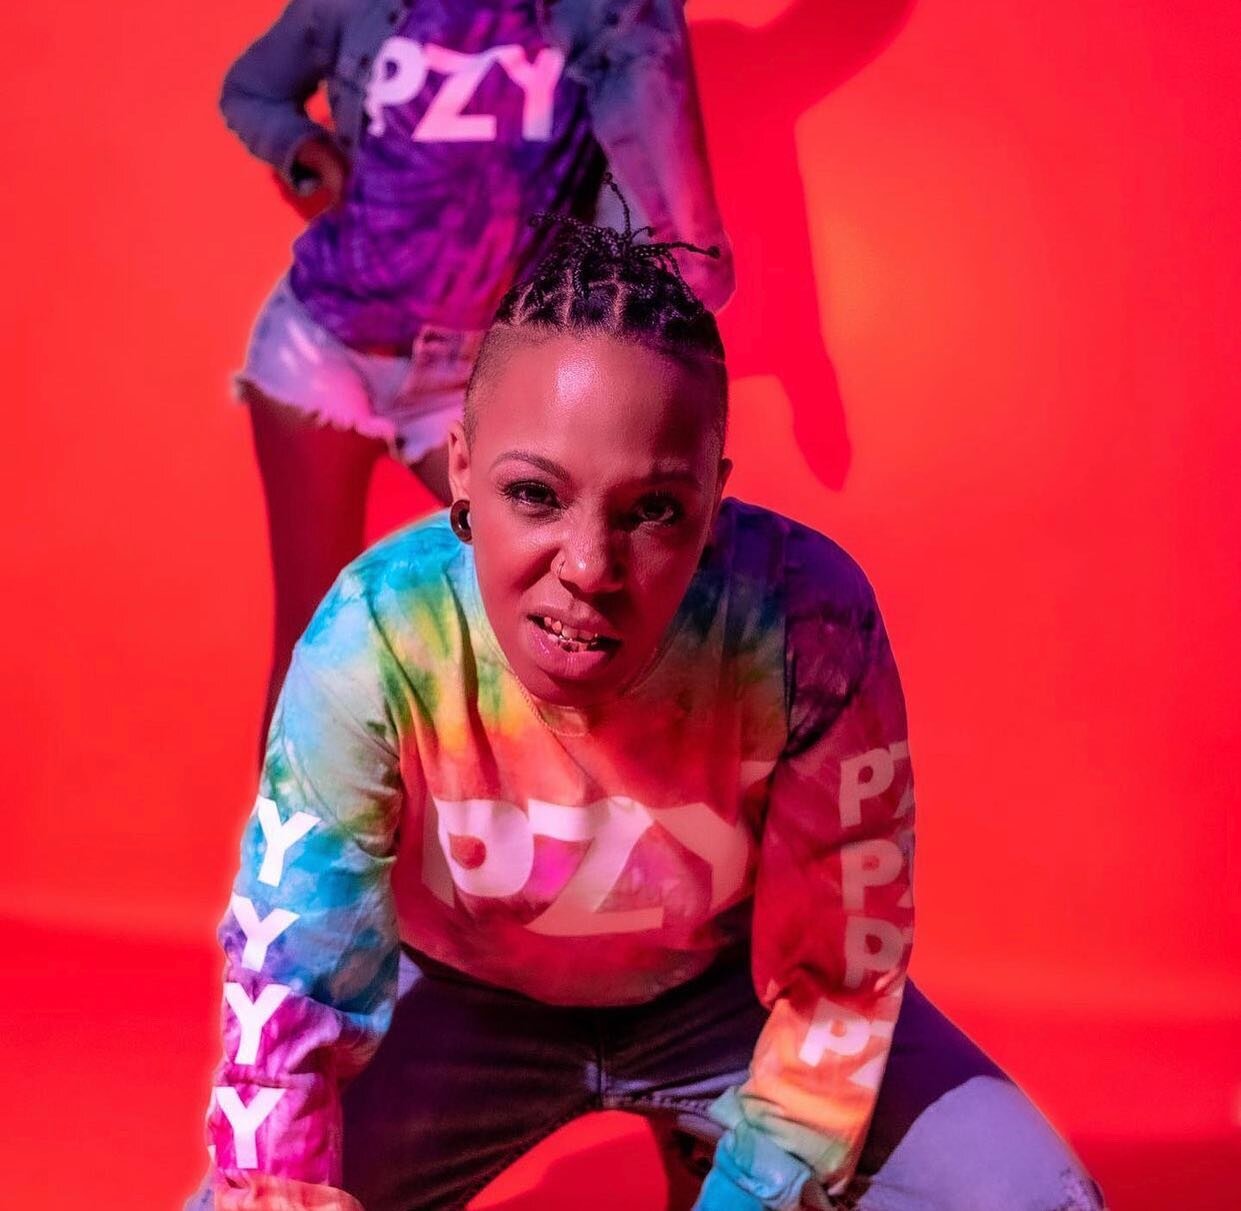 Get to know #PZY. Bet you can&rsquo;t grind harder. One of the hardest working musicians in this game. When you talk top 5 #FemaleProducers, PZY should and will be in that conversation. The @recordingacademy has yet to award a female producer of the 